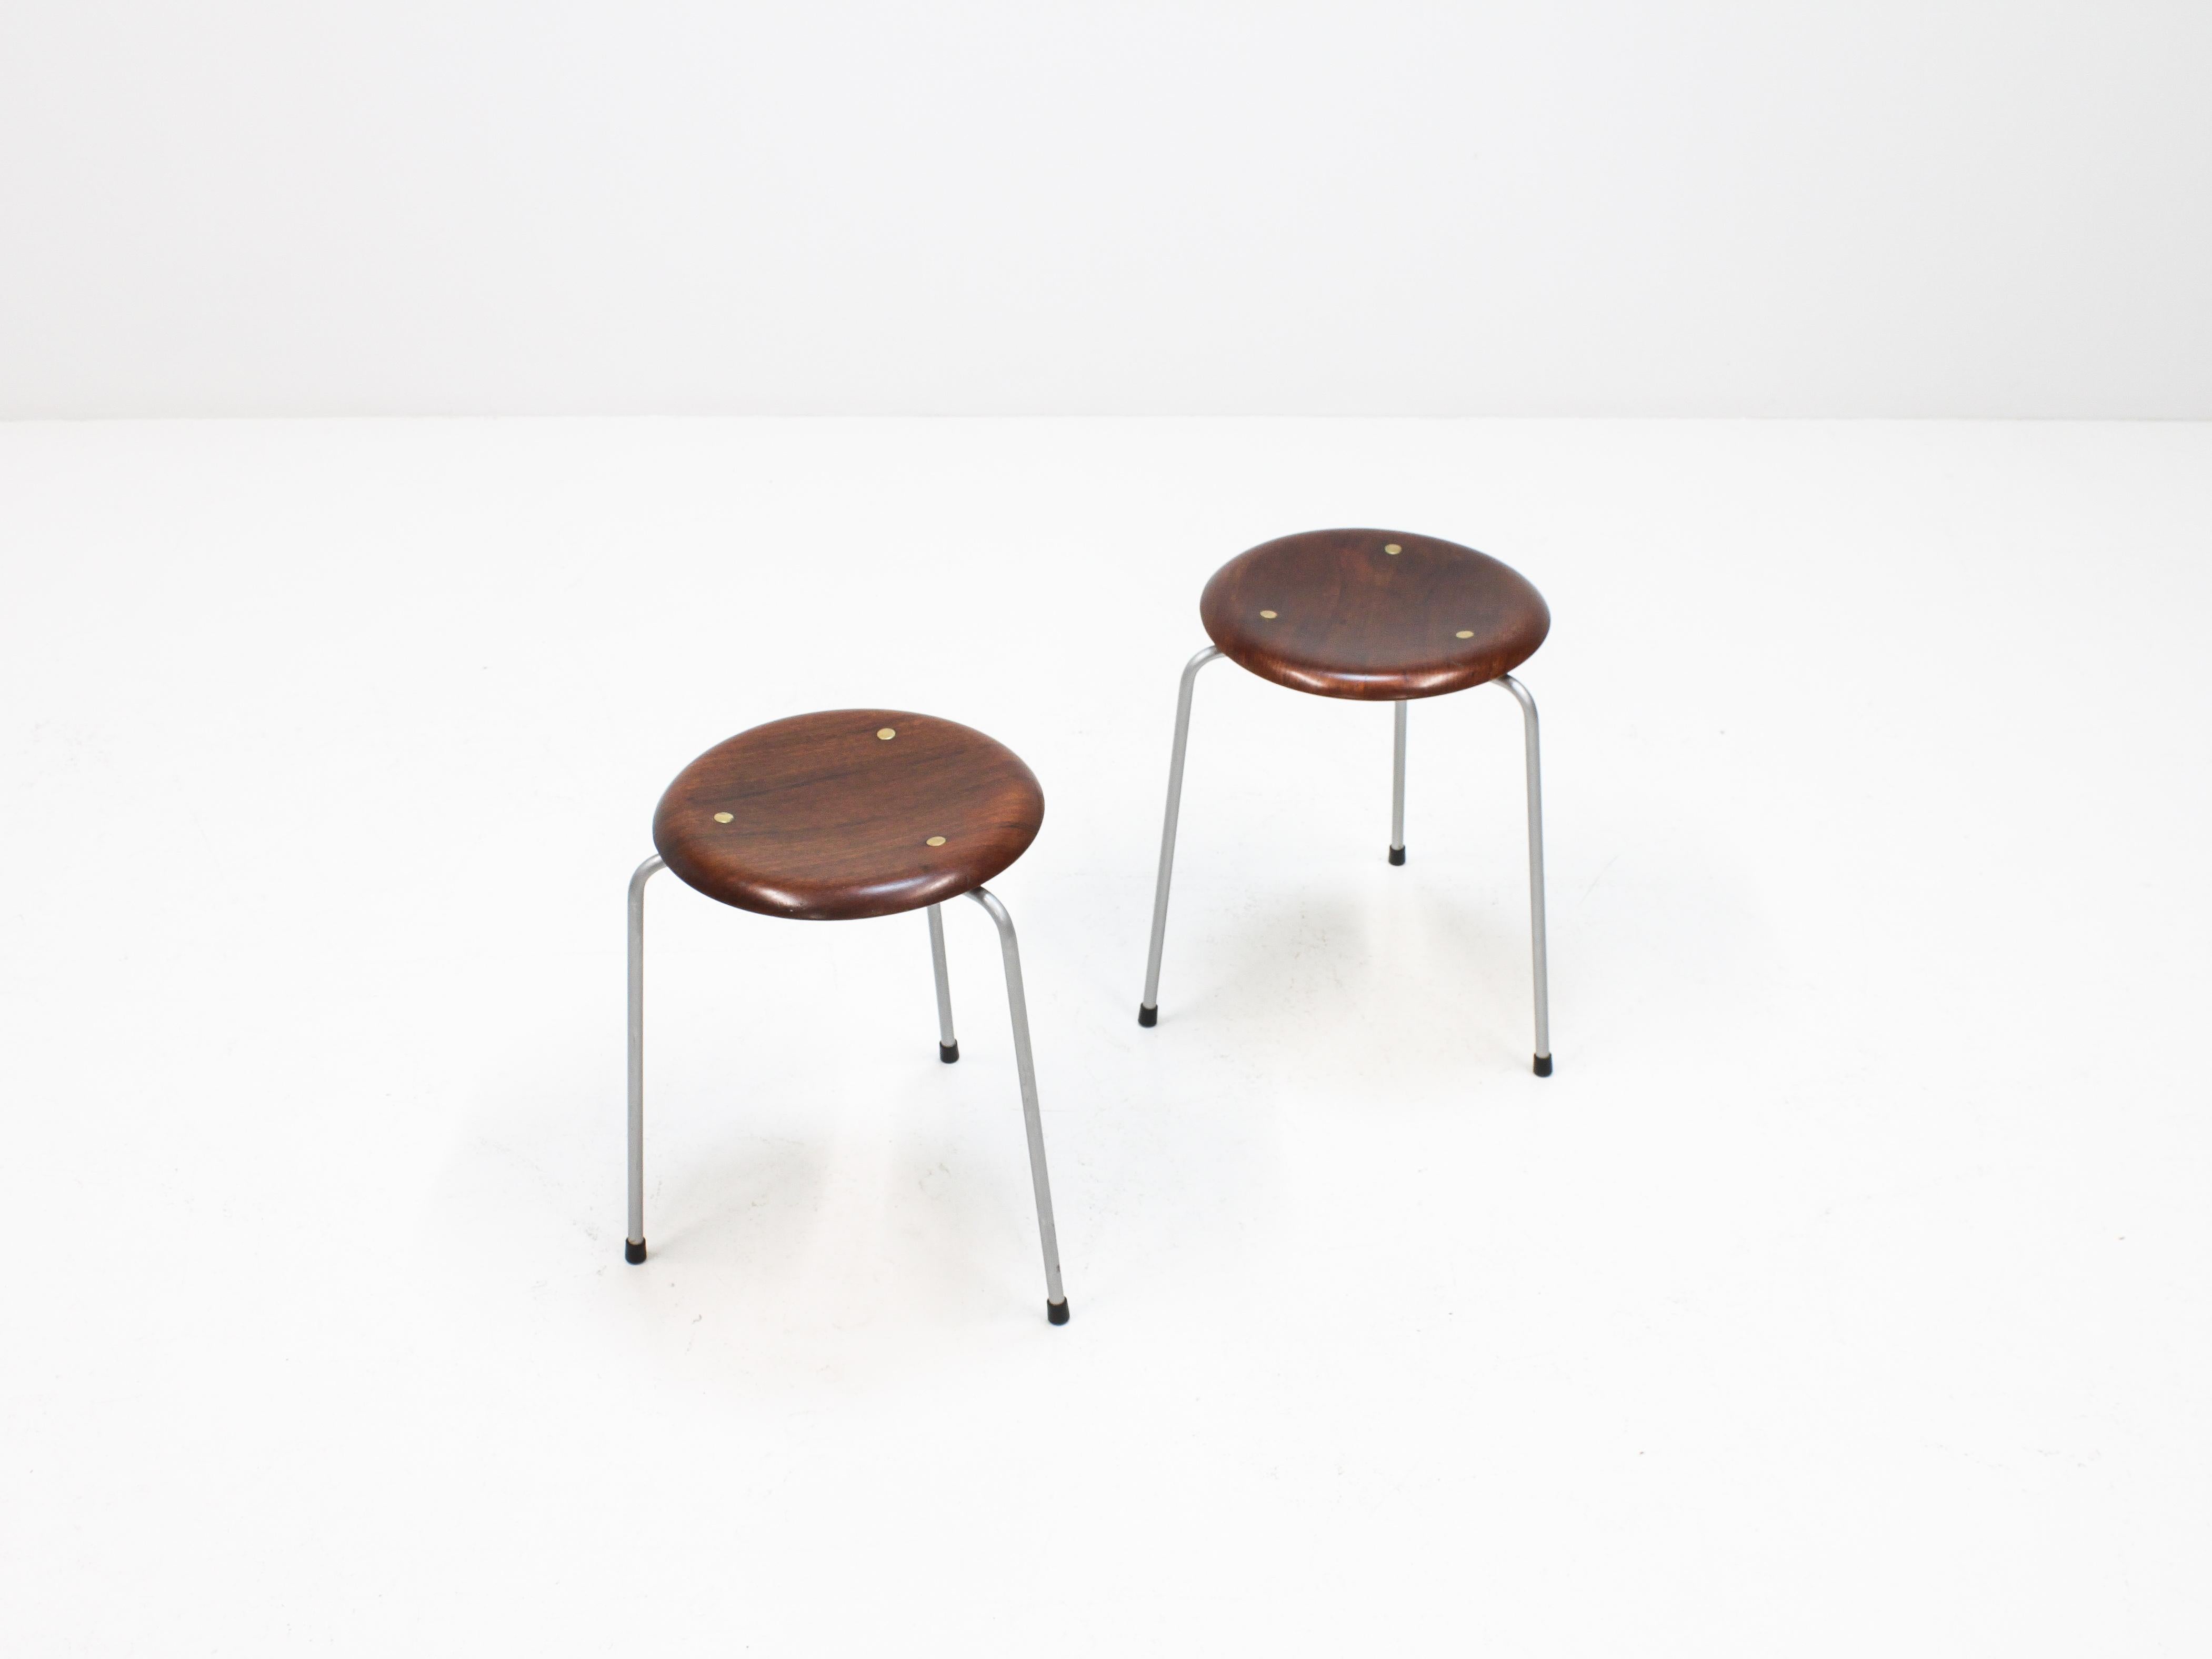 A hard to source early Arne Jacobsen circle/dot stool, first edition with brass dot, dating from the 1950s. 

Stamped 'Fritz Hansen', made from teak and steel.

In good vintage condition, dating from the 1950s please expect some signs of wear in